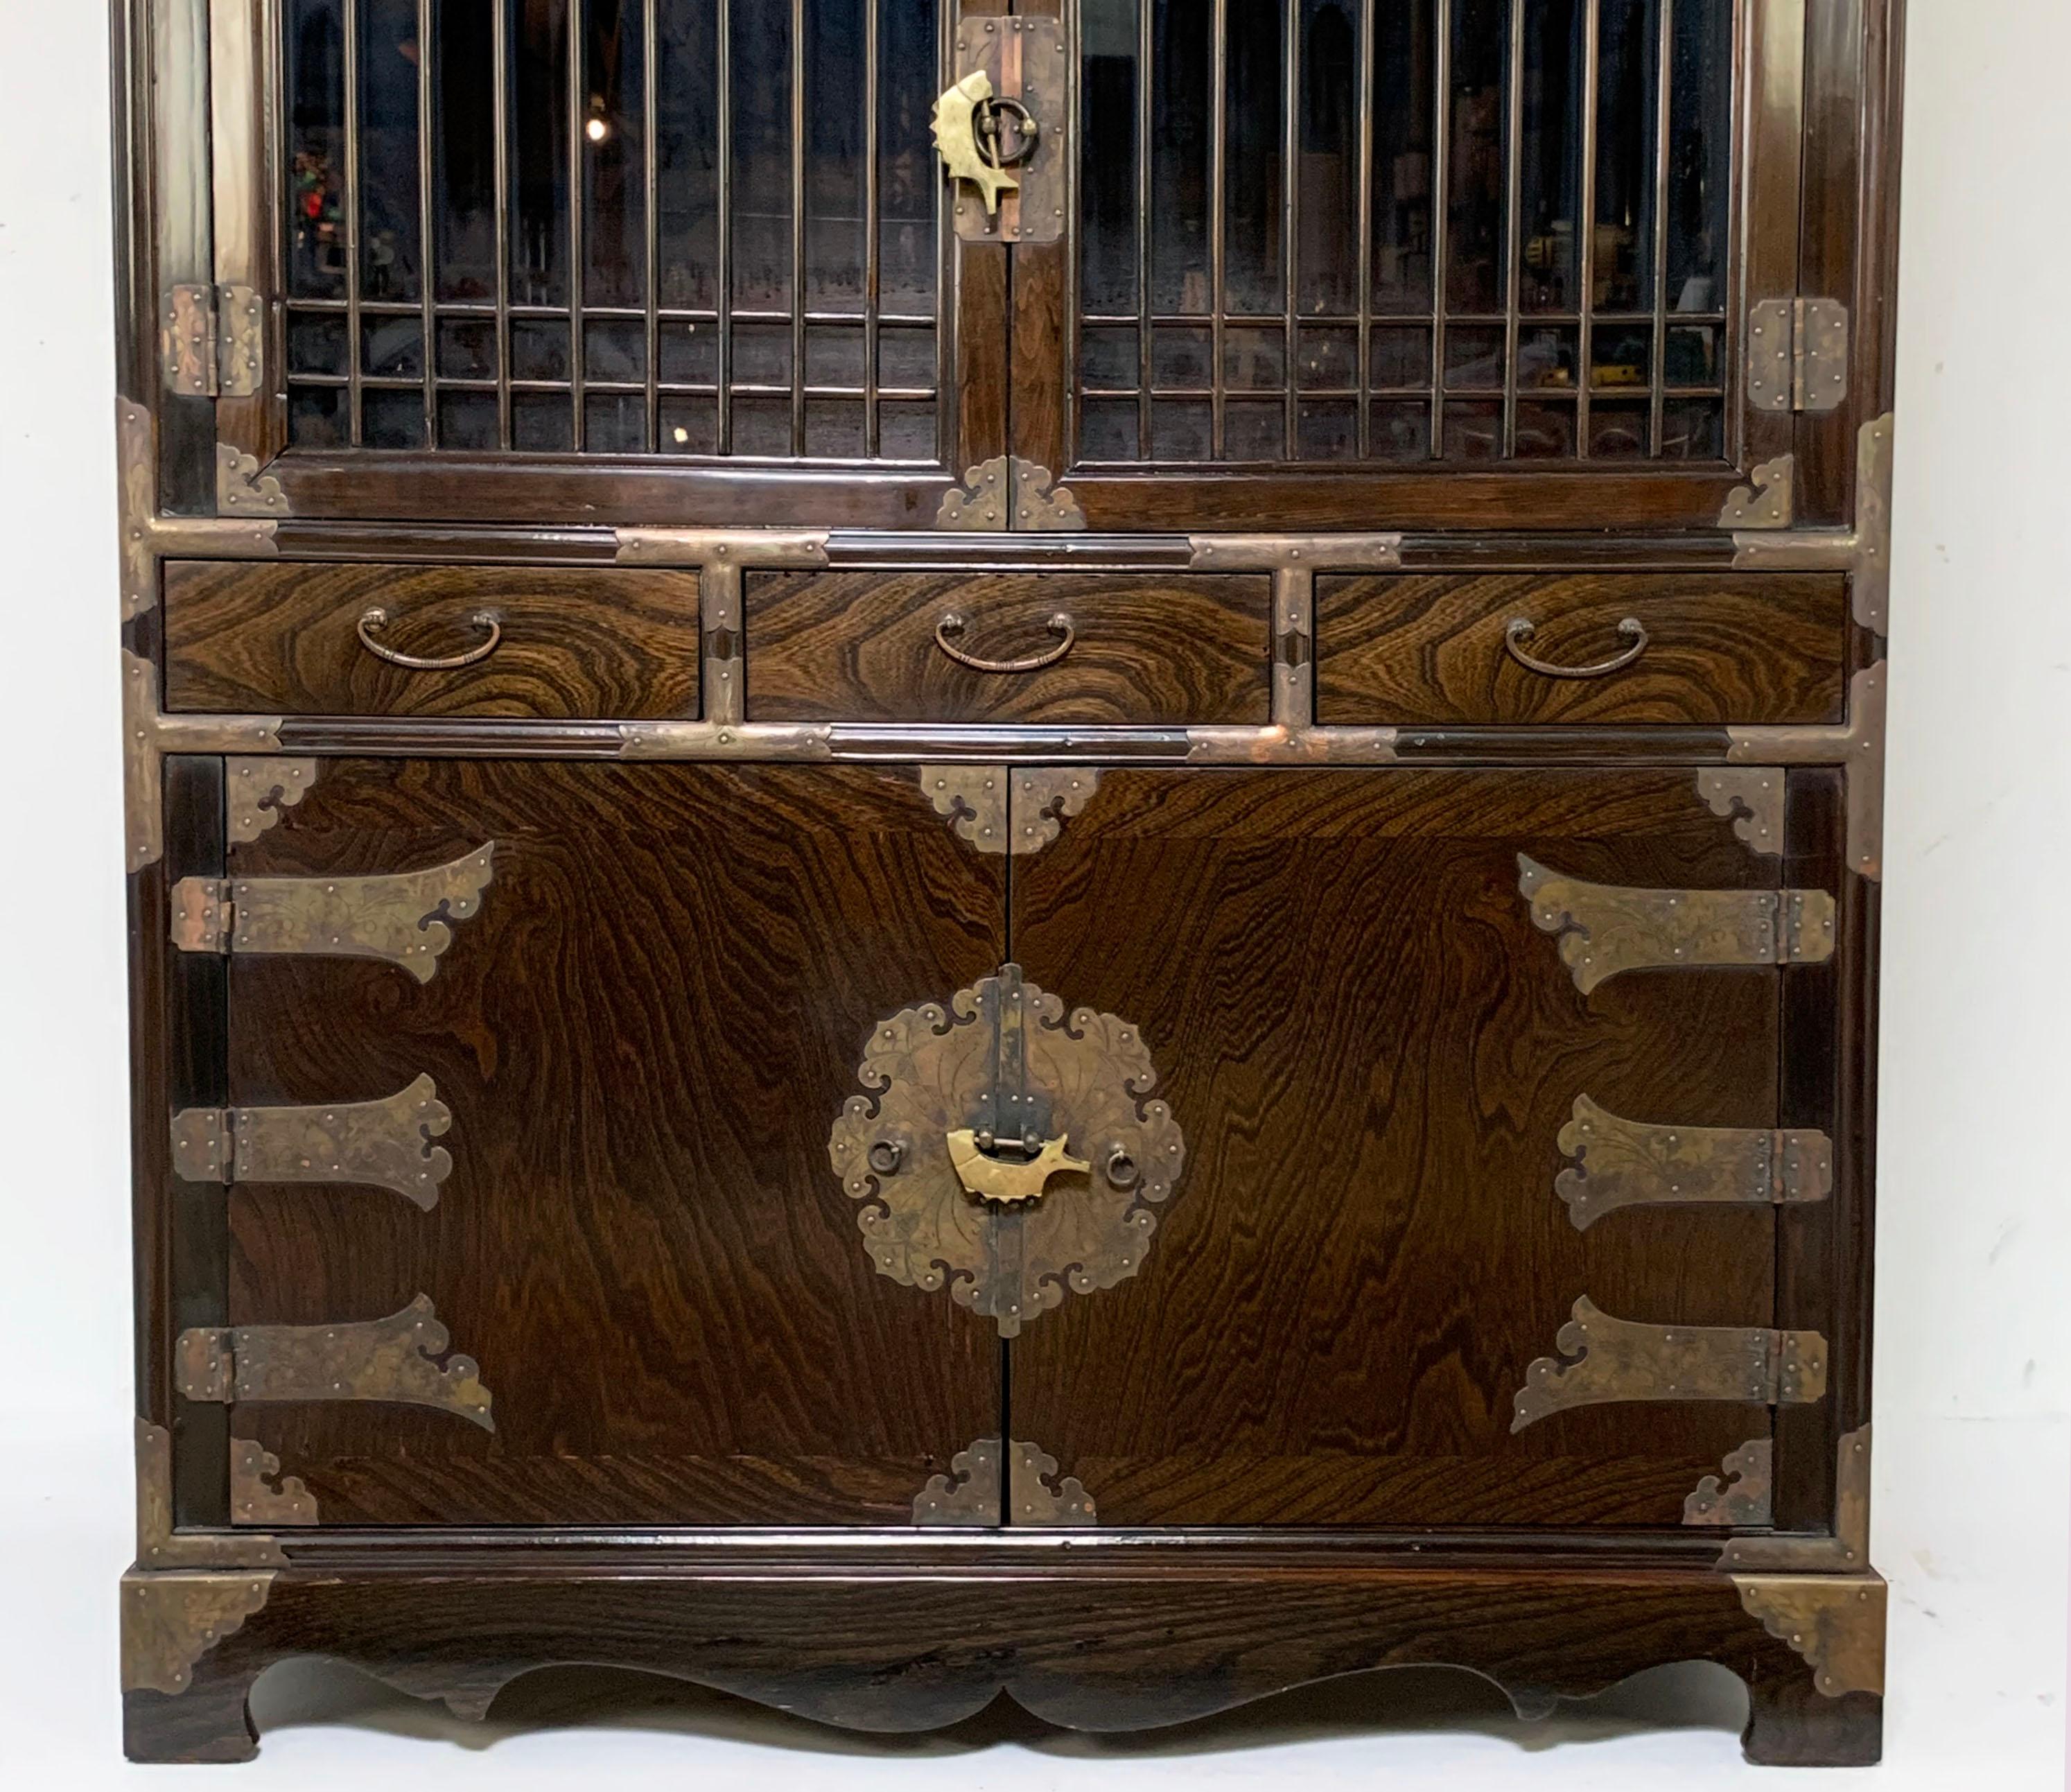 An unusual two-piece vintage Korean cabinet with glass display doors behind finely latticed mullions. Finely detailed brass work on this six foot tall display cabinet, comes with locks for all three sets of doors. 

The bottom cabinet measures